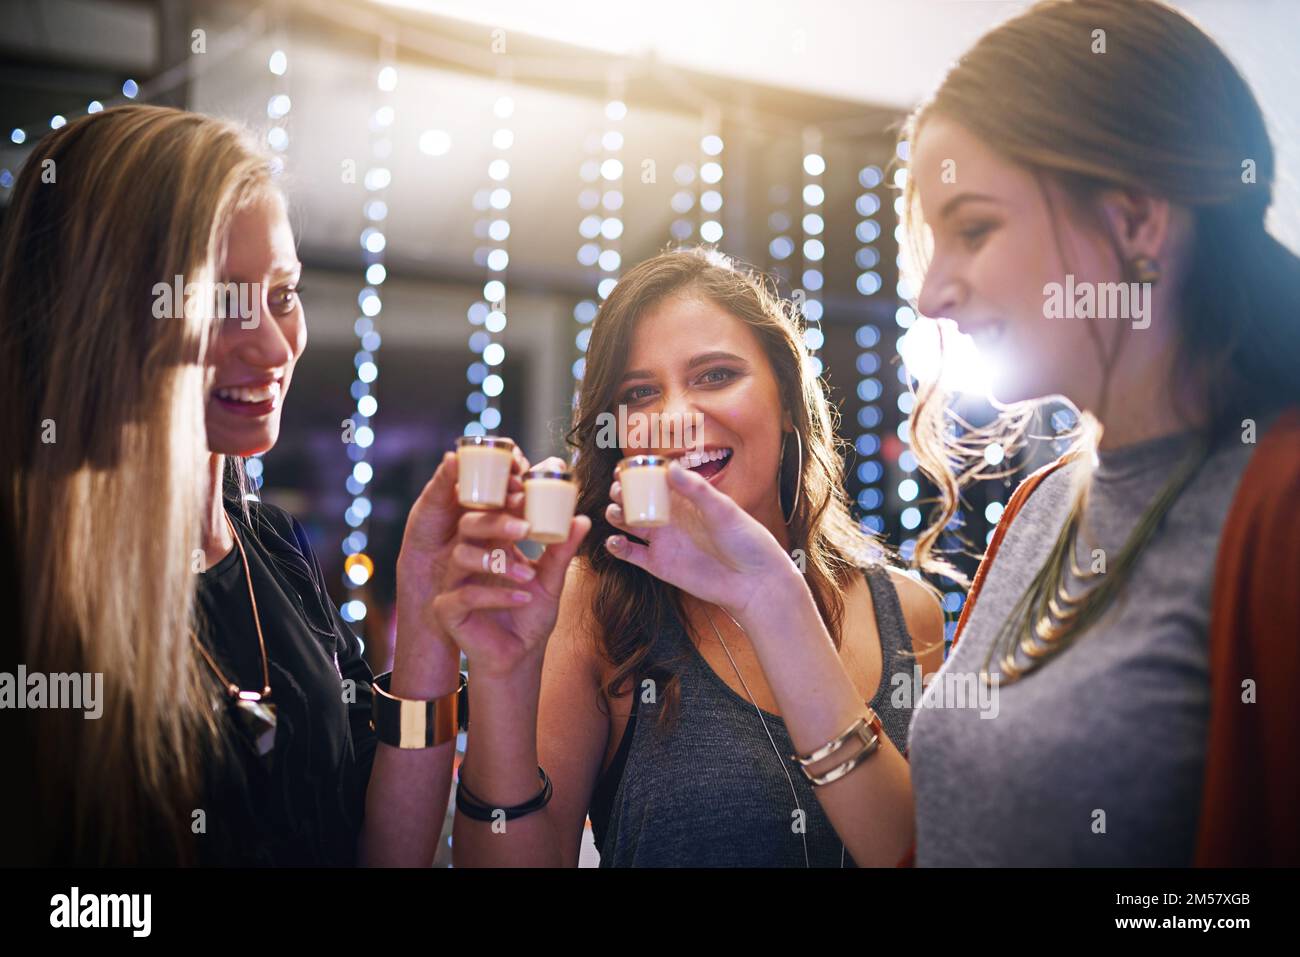 The party is in full swing now. a group of friends having shots together at a party. Stock Photo